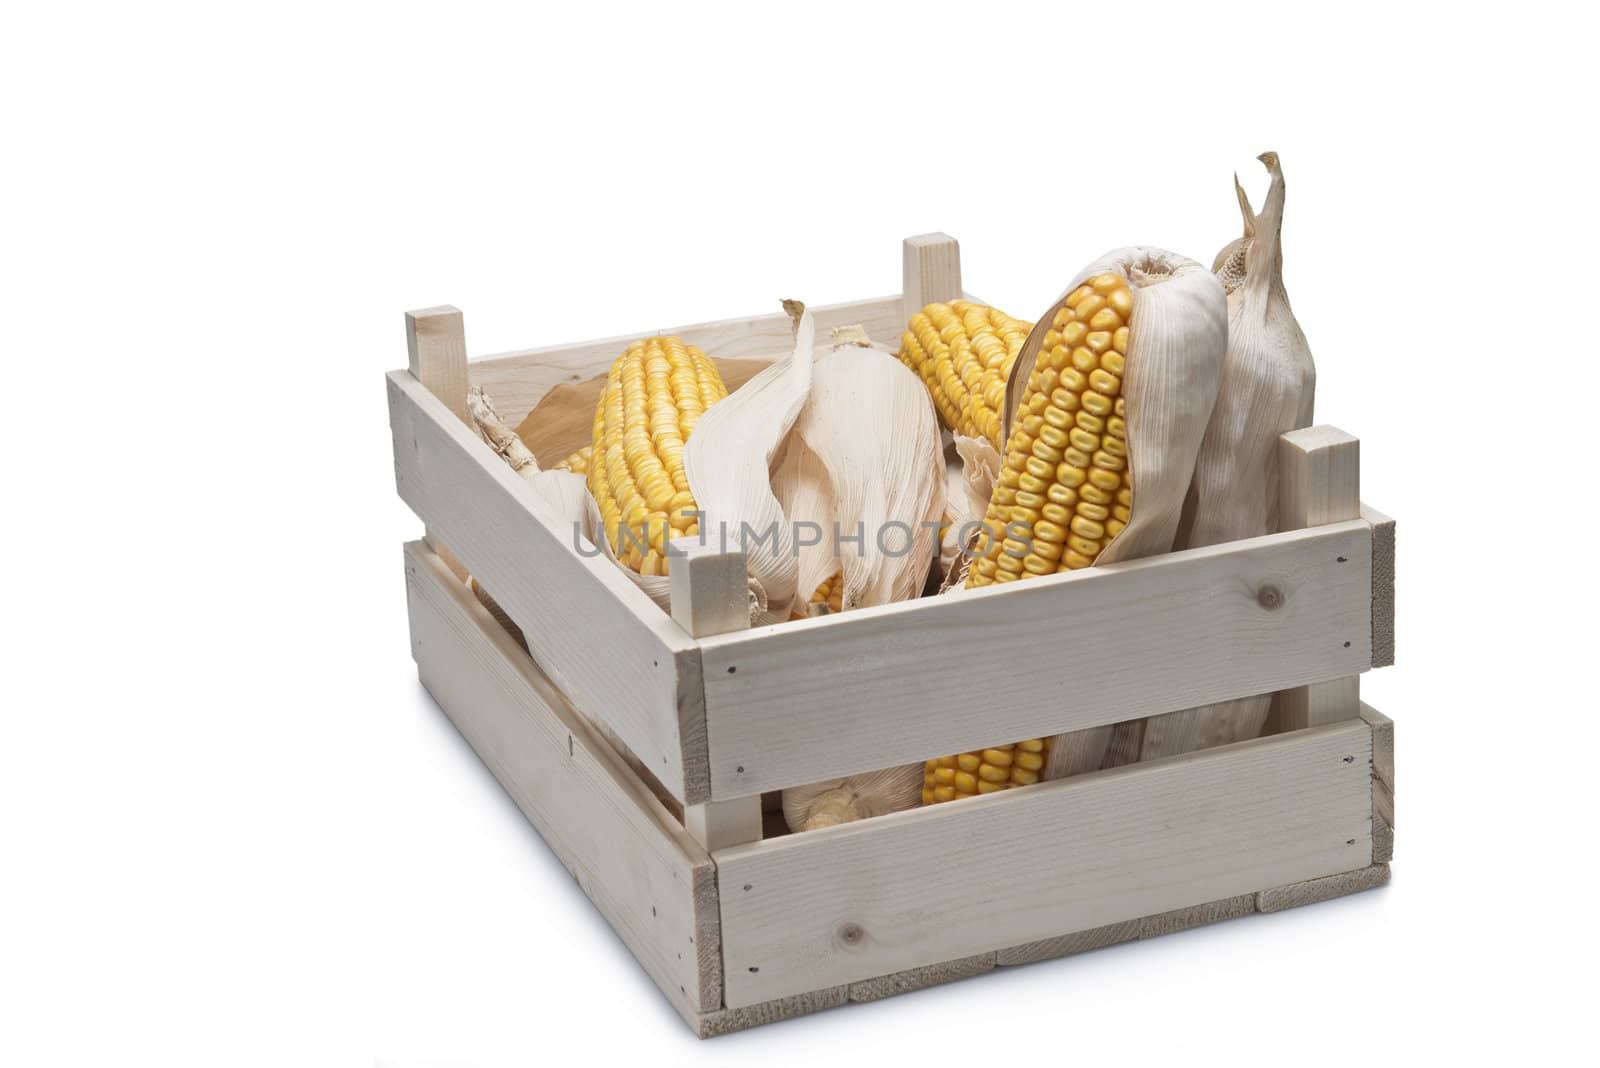 Wooden crate full of corn ears isolated on a white background